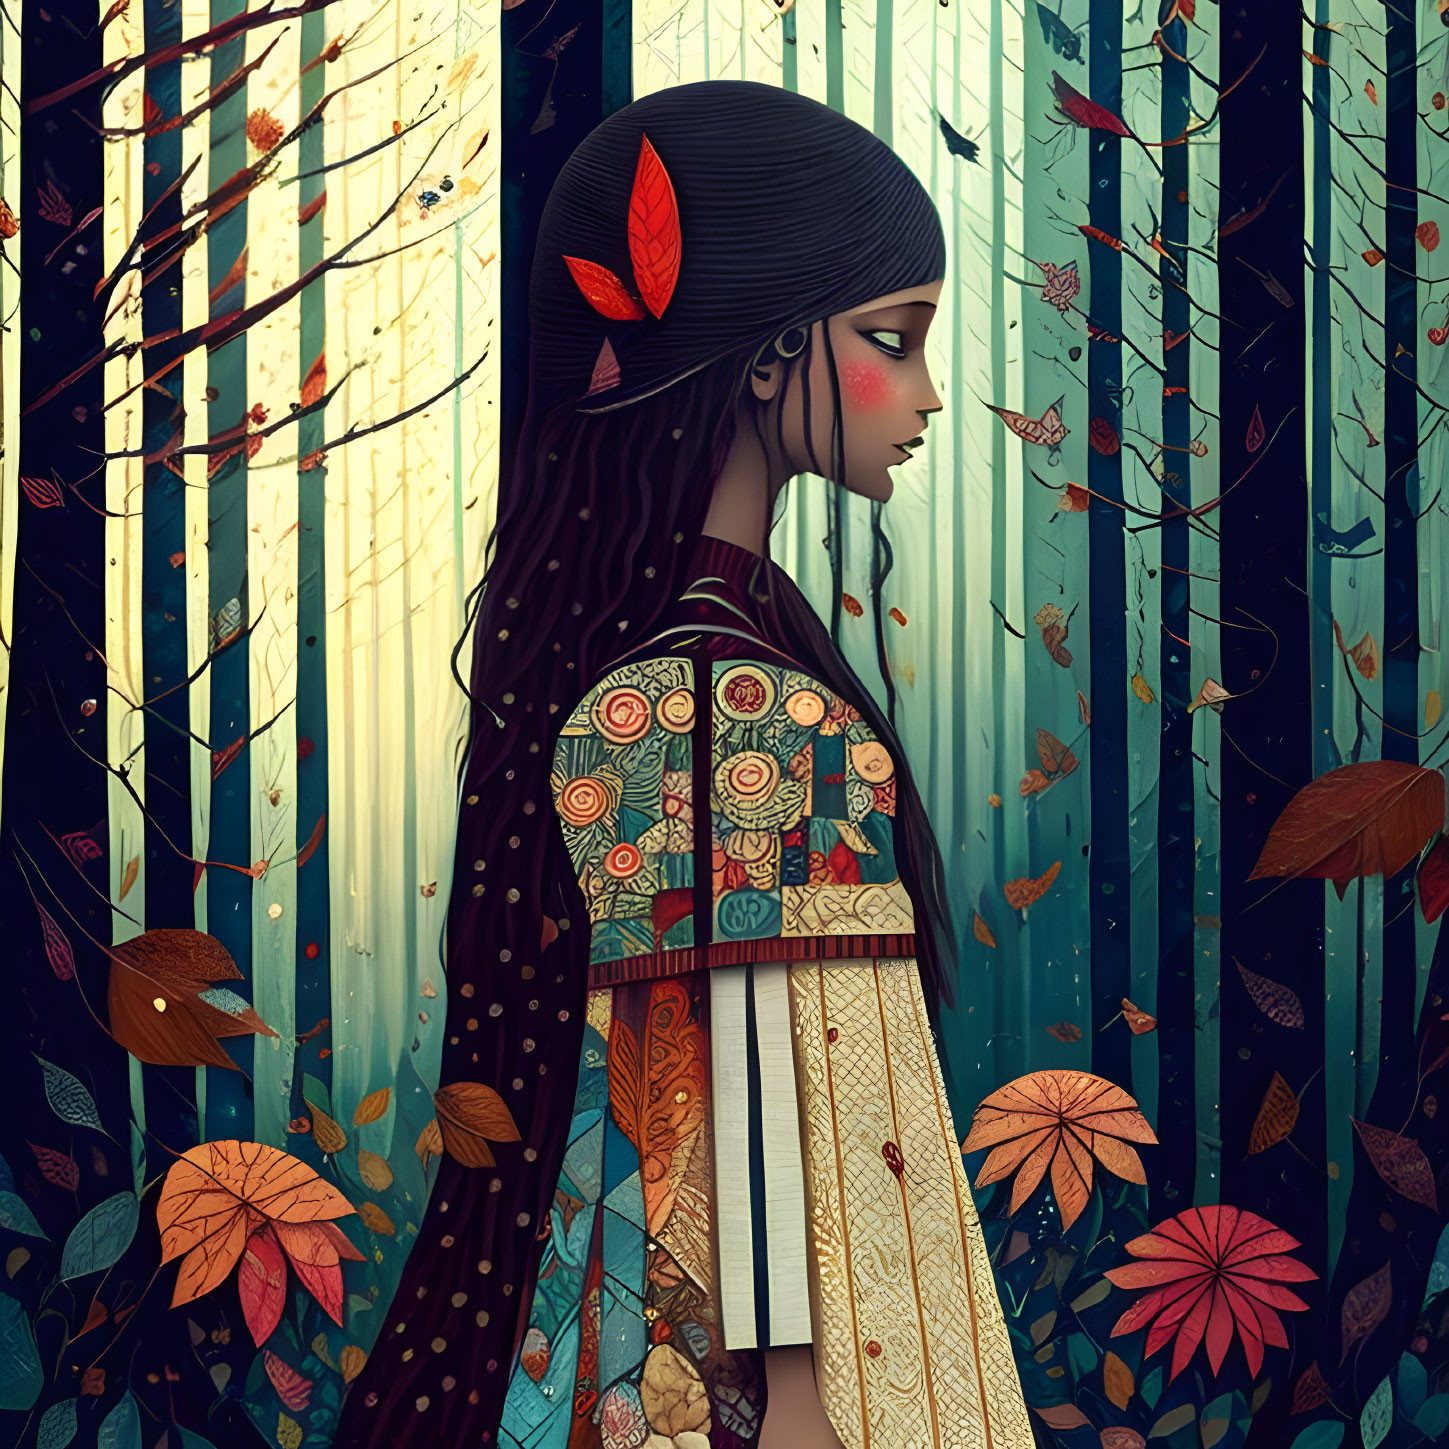 Stylized woman with red leaf in hair in fantastical forest illustration